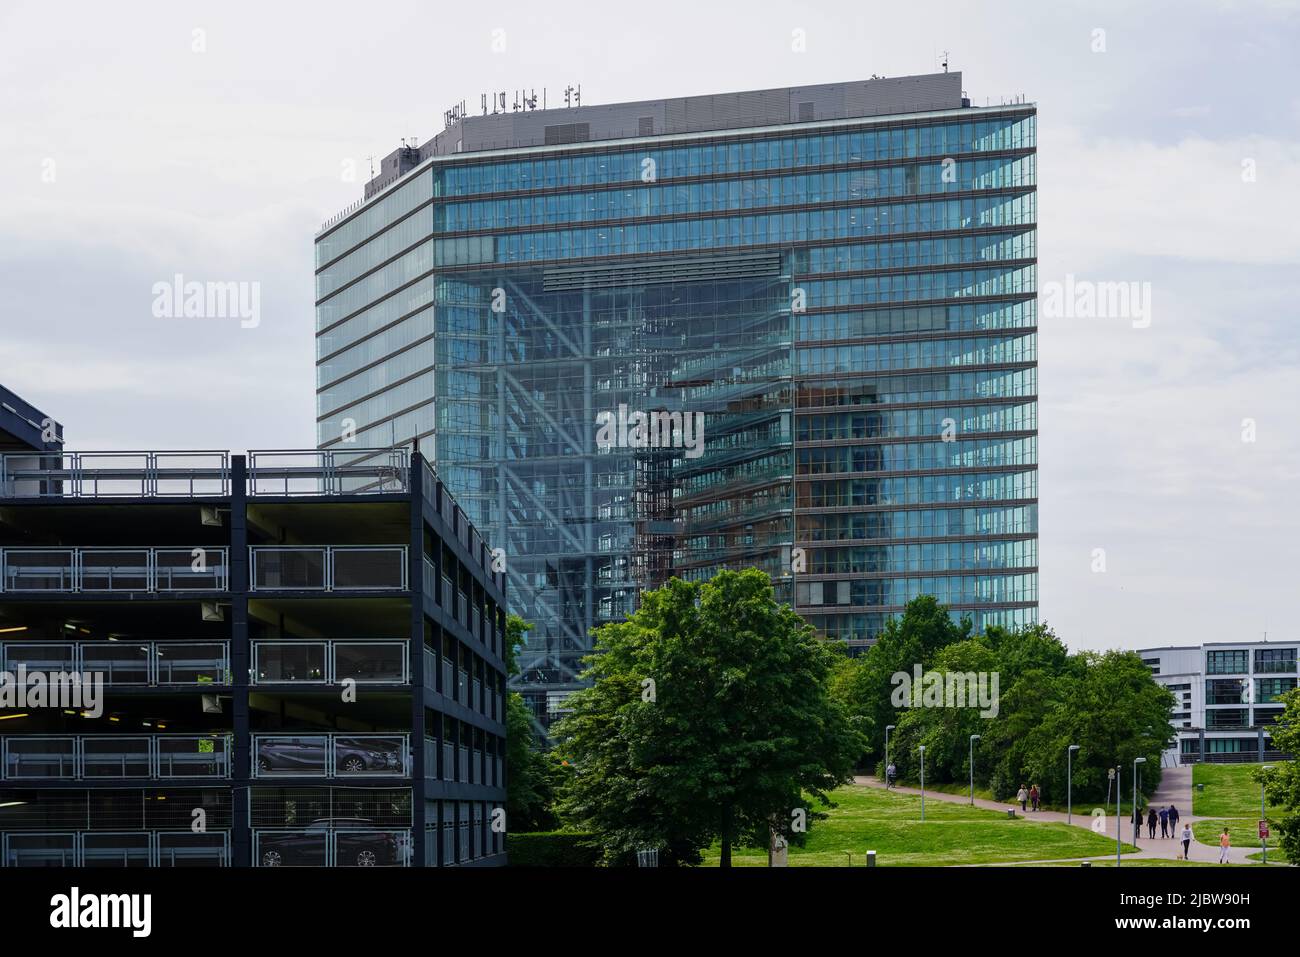 The Stadttor is a high-rise office building in the Unterbilk district of Düsseldorf, North Rhine-Westphalia, Germany, 23.5.22 Stock Photo